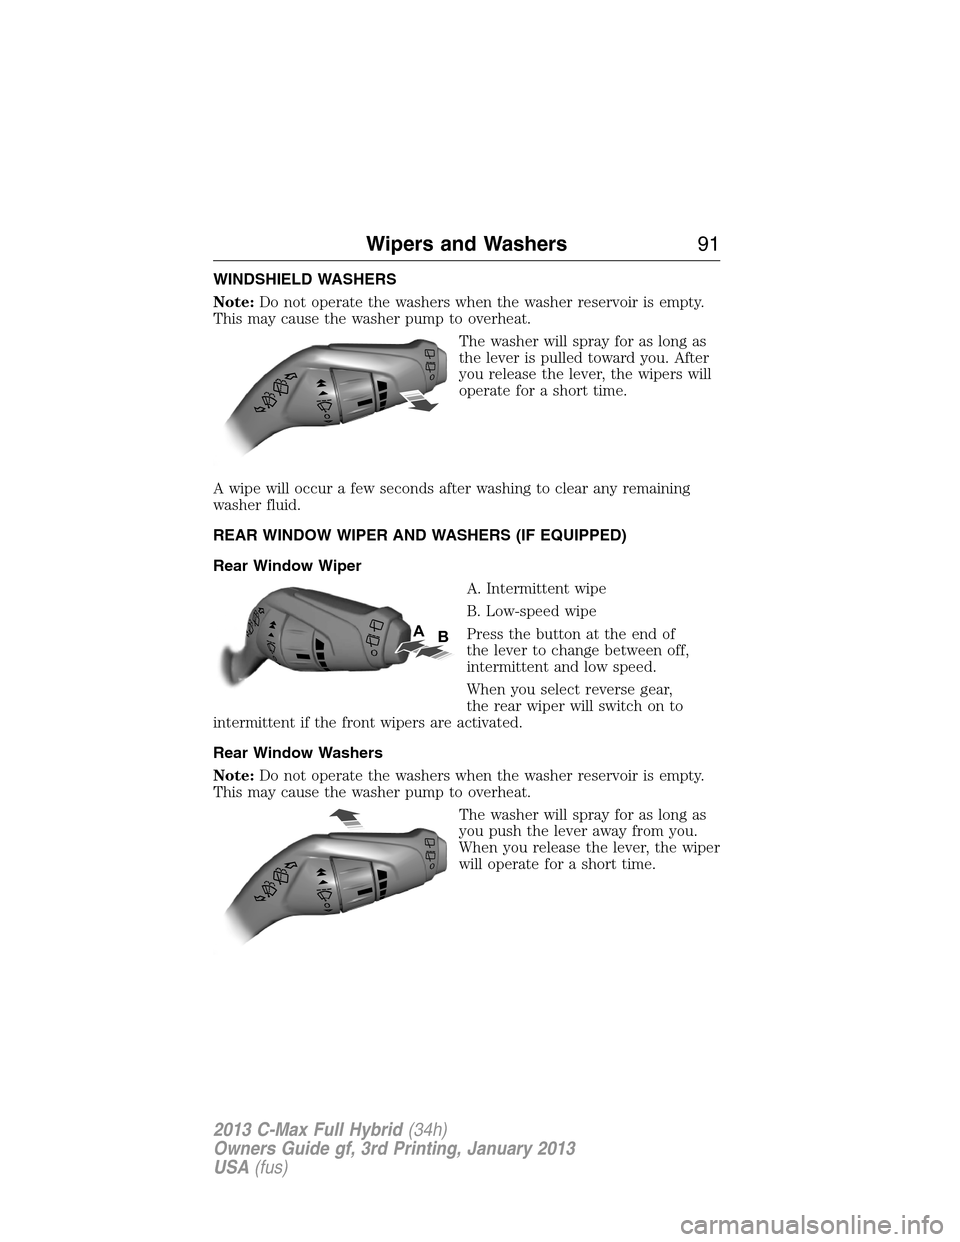 FORD C MAX HYBRID 2013 2.G Owners Manual WINDSHIELD WASHERS
Note:Do not operate the washers when the washer reservoir is empty.
This may cause the washer pump to overheat.
The washer will spray for as long as
the lever is pulled toward you. 